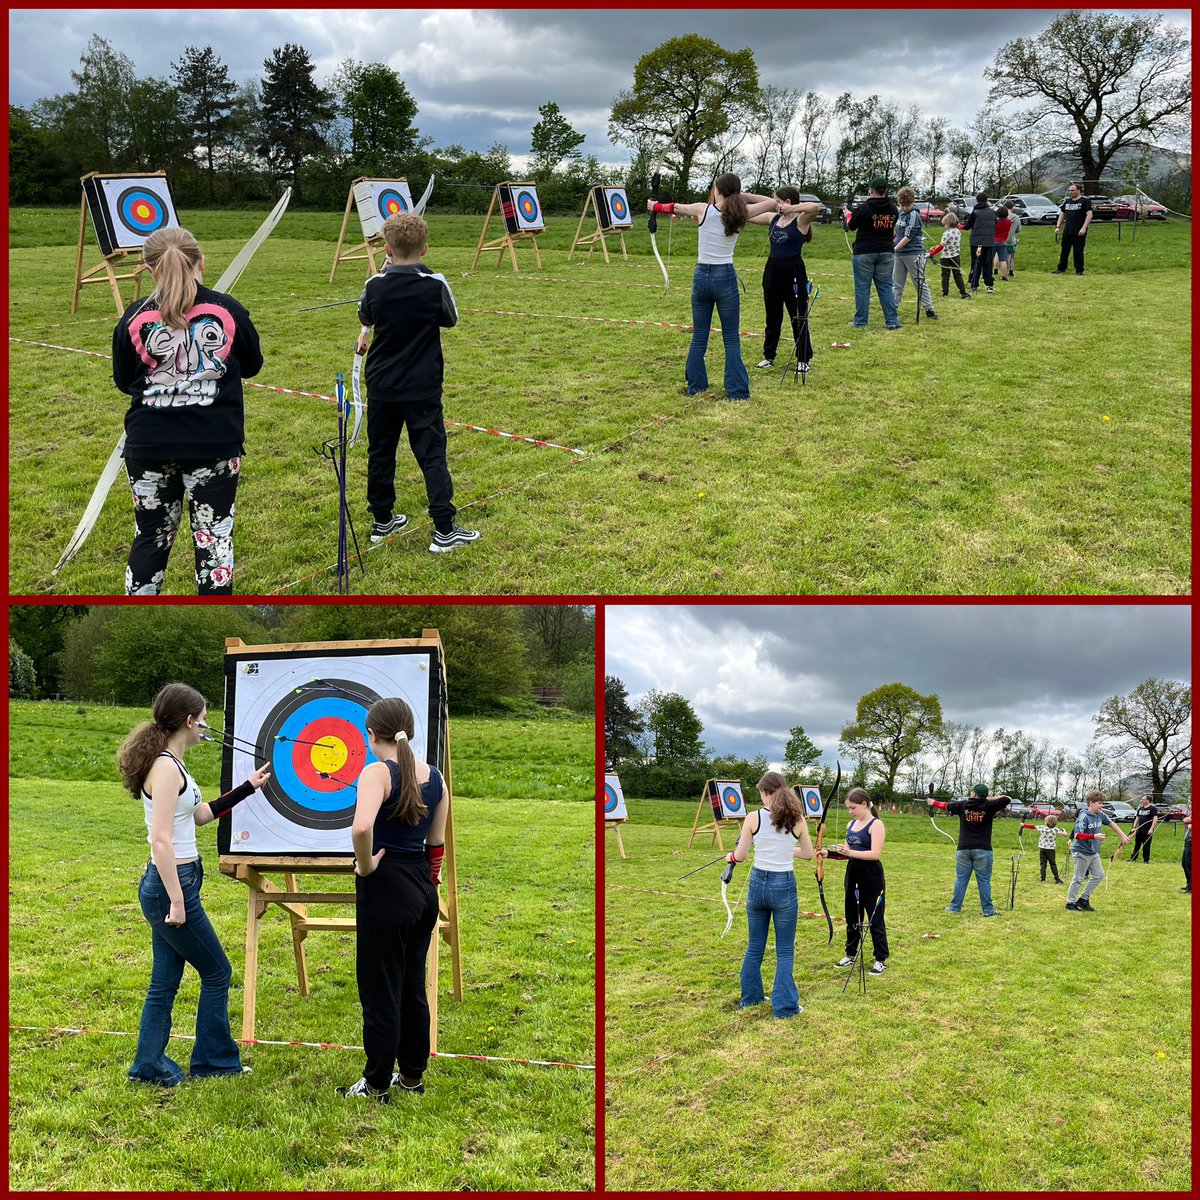 A brilliant turnout today for our #StartArcheryWeek session 🏹🏹 Brilliant to welcome some new faces to the club & introduce them to our fantastic sport 👍

@archerygb @scottisharchery @ActiveClacks